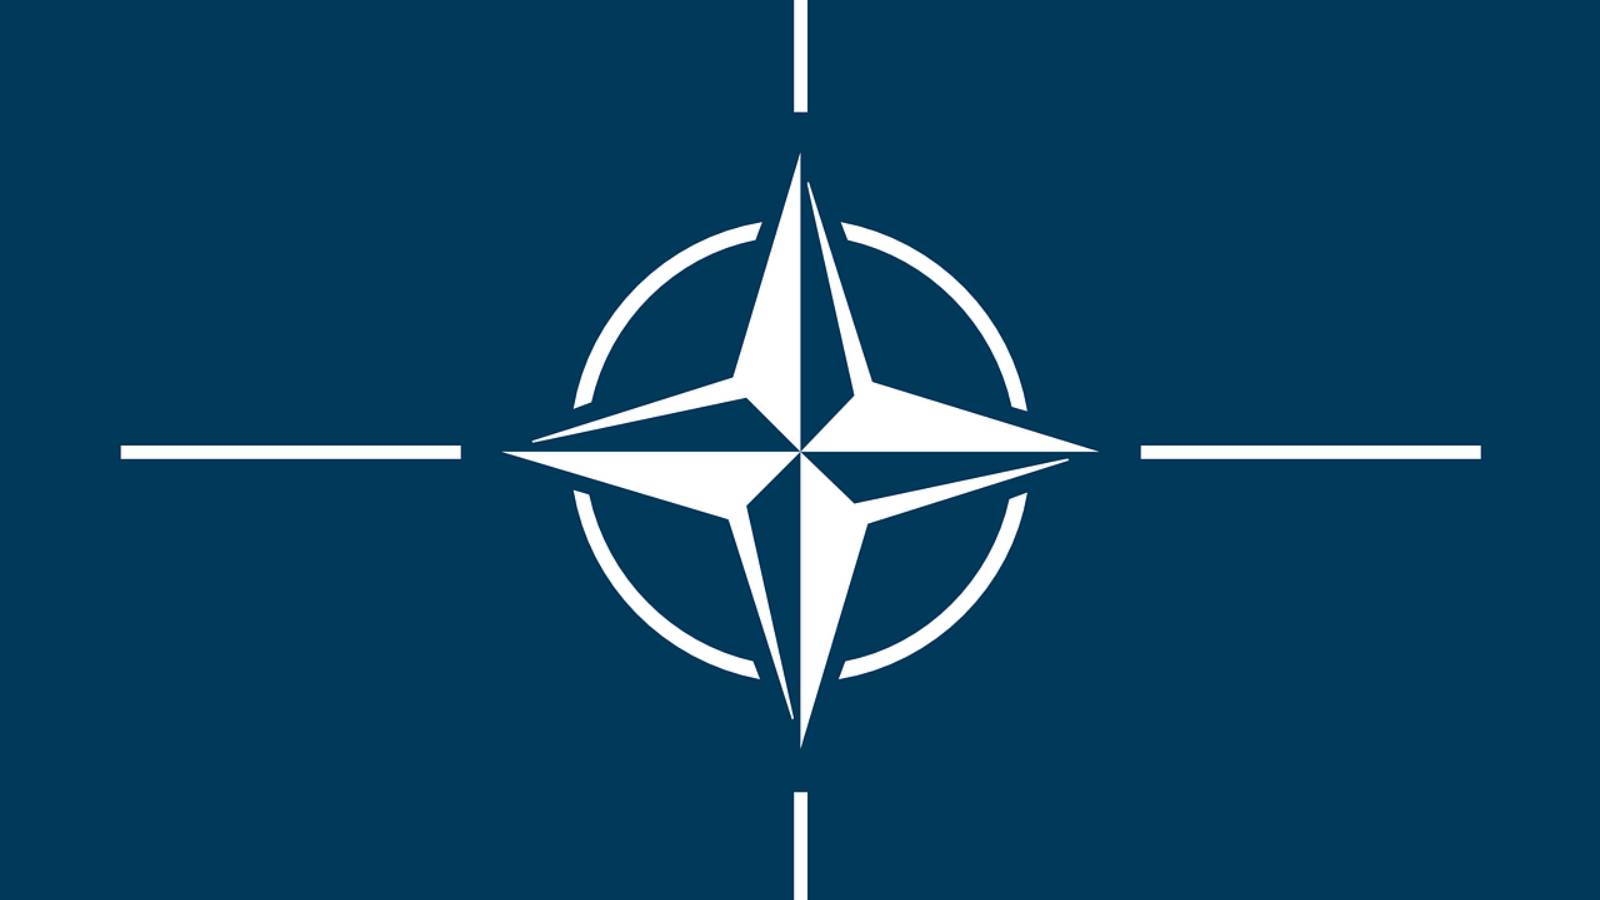 23 NATO countries have ratified the accession of Finland and Sweden